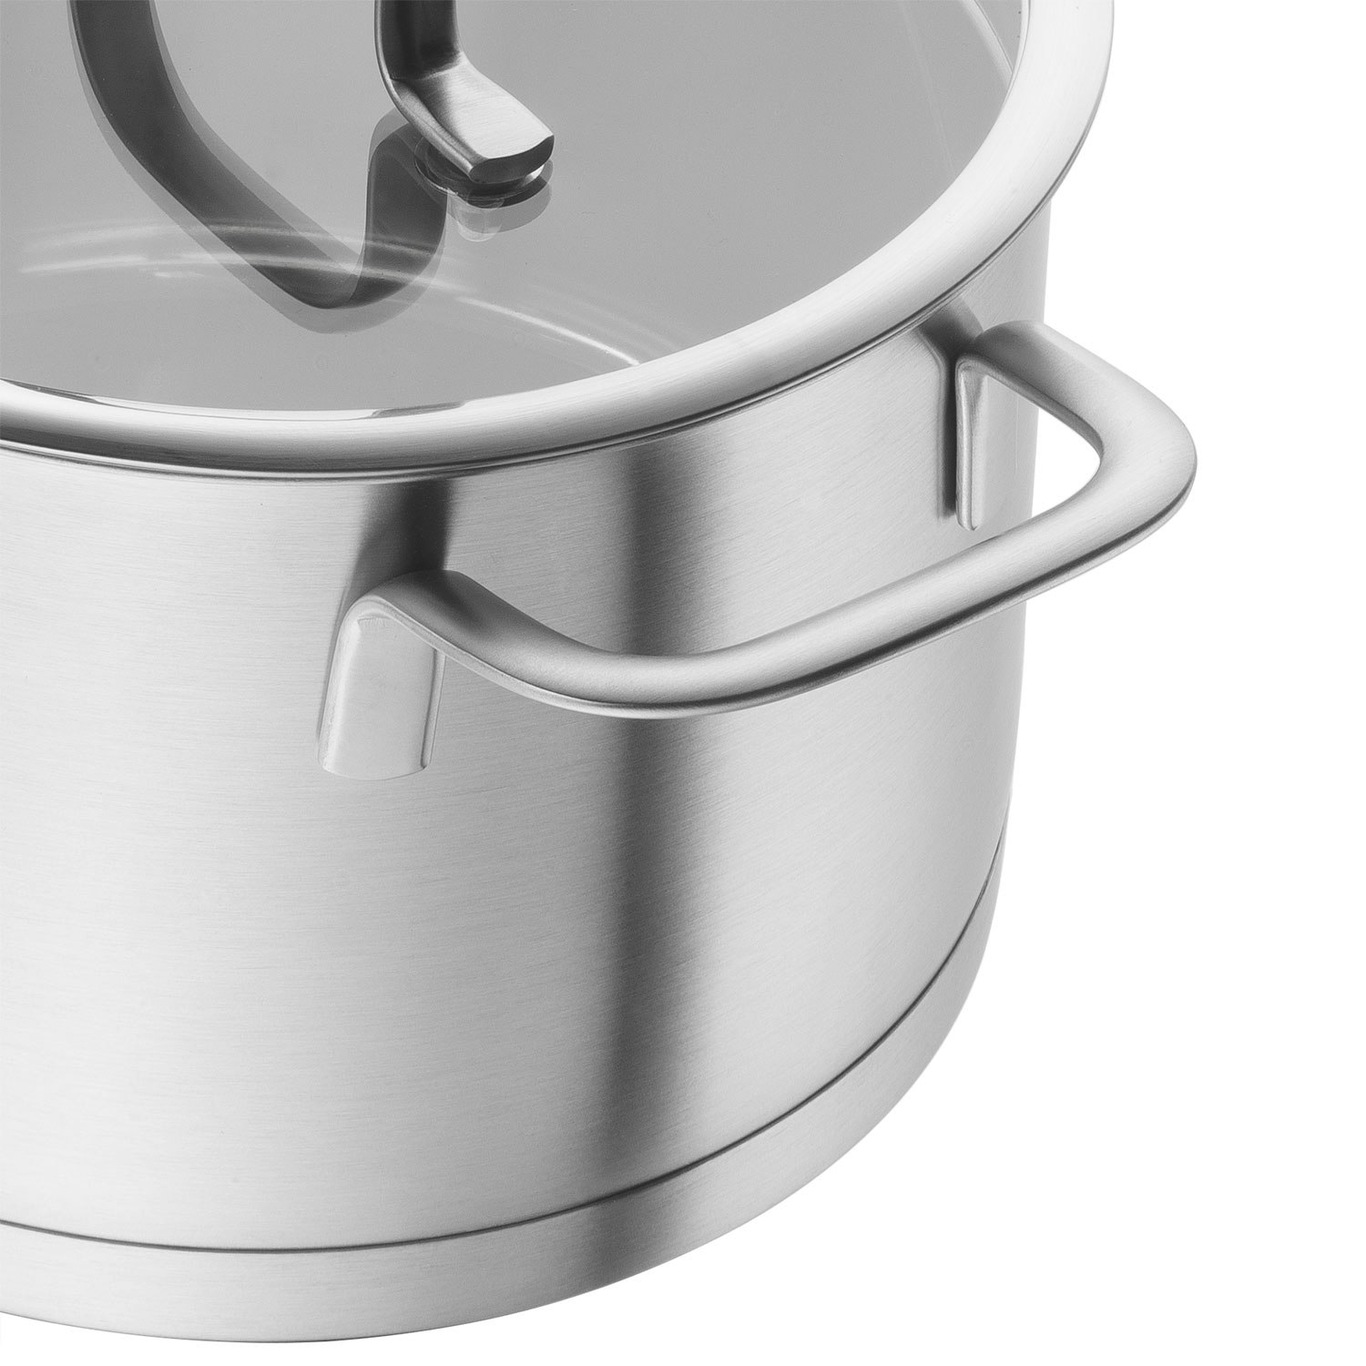 Stainless steel pot set by Eva Trio in our shop